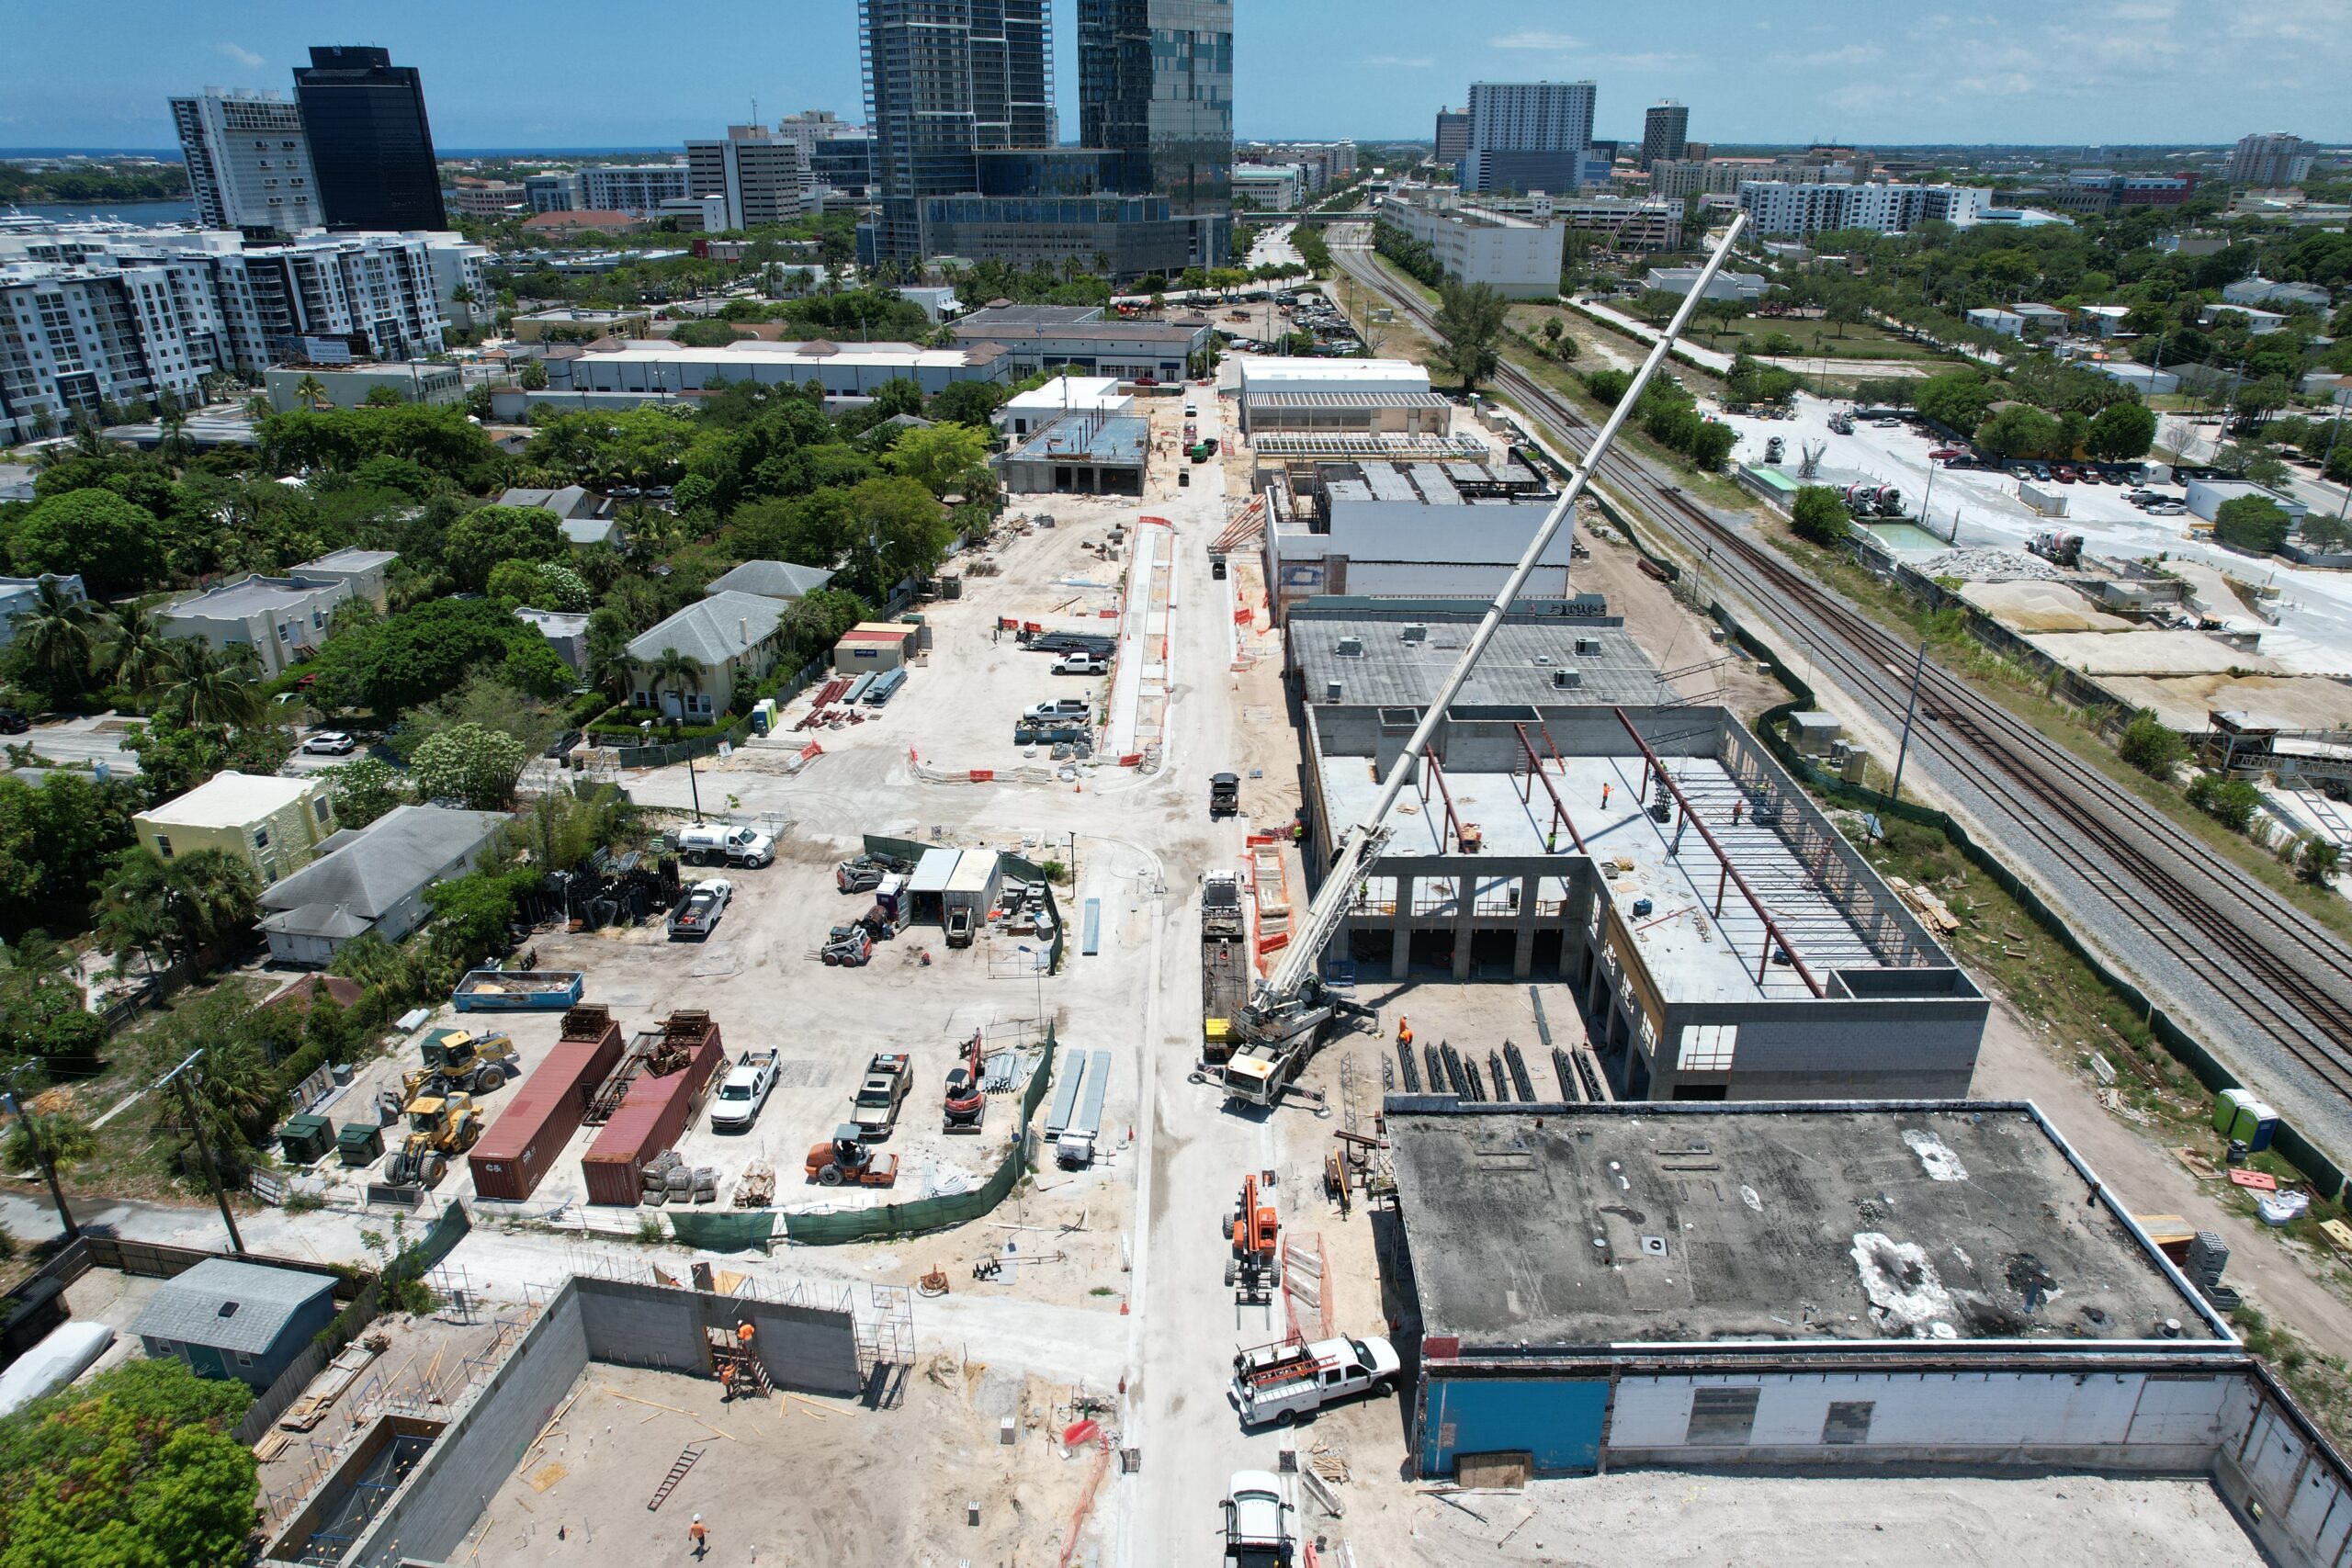 Read the article Nora Secures $84M Construction Loan, on South Florida Business Journal